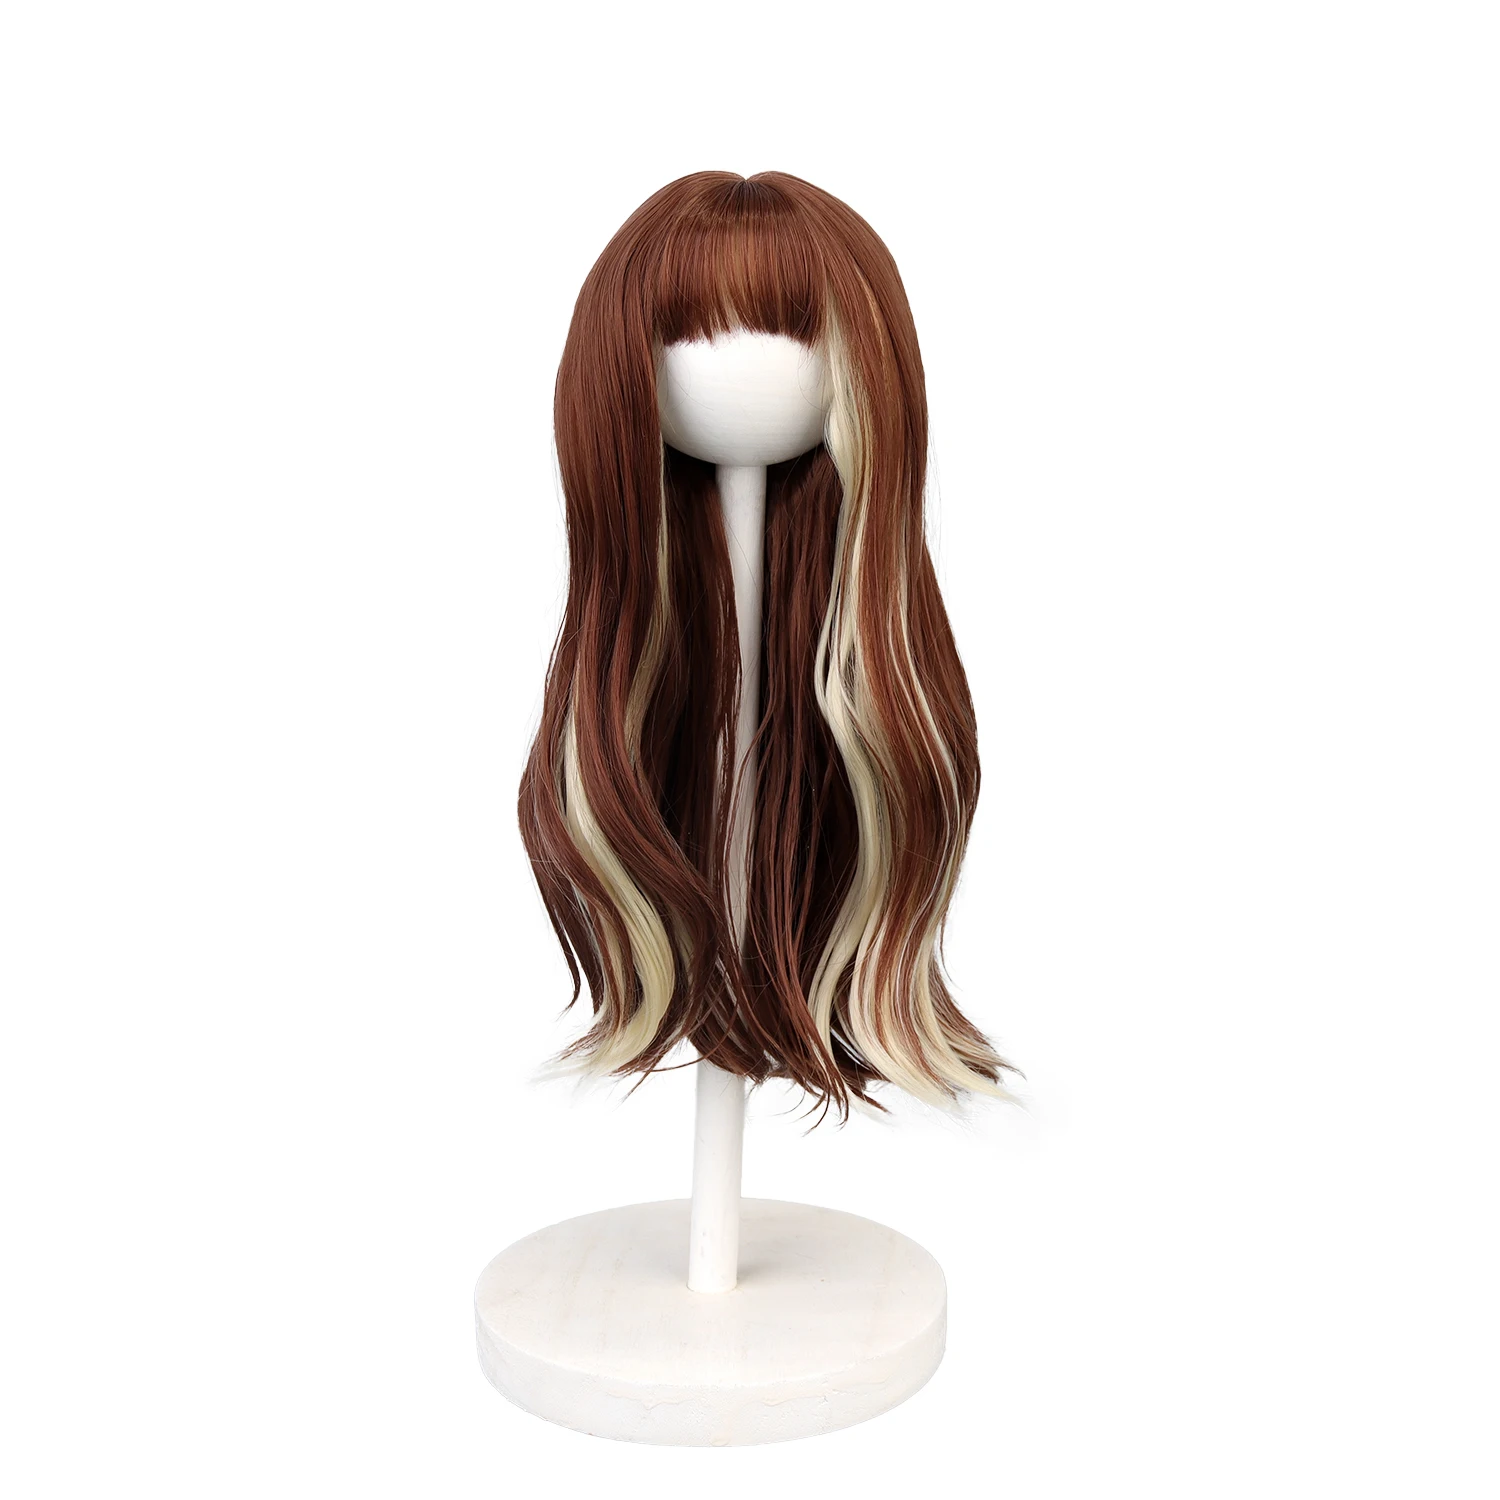 18 Inch American Doll Wigs 27cm Head Circumference Long Wavy Red Brown Blonde Highlight  High Temperature Hair For Doll Girls htd 8m synchronous belt has a circumference of 3048mm 5120mmmm width of 15 20 25 30 40 50mm high torque rubber synchronous belt